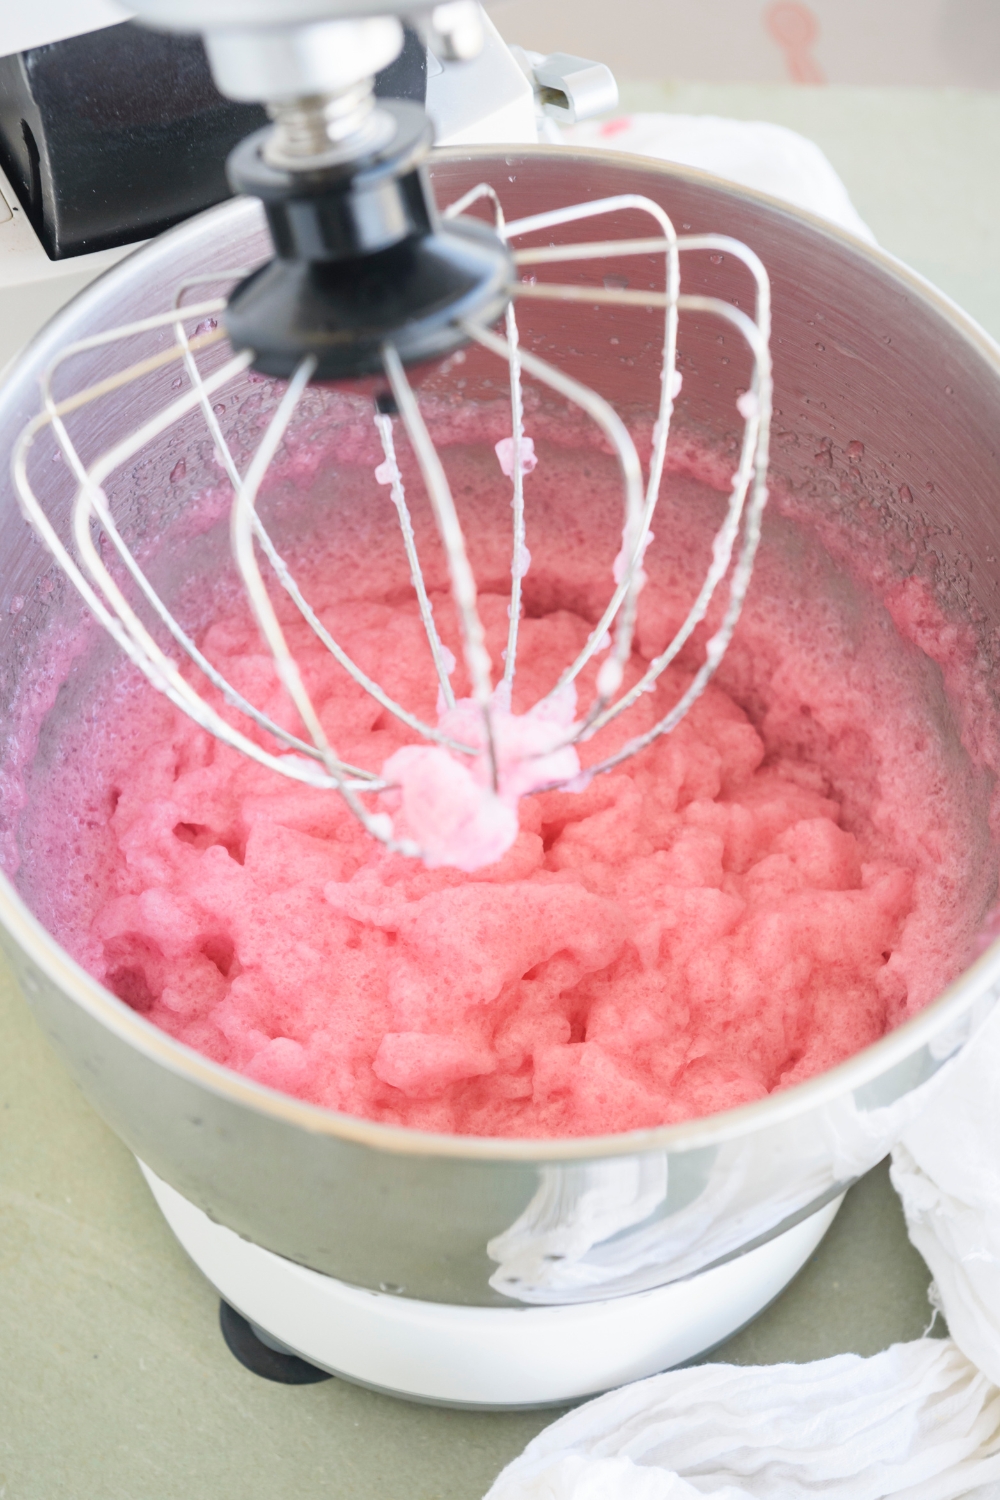 A standing mixer with a foamy pink blended mixture in it.